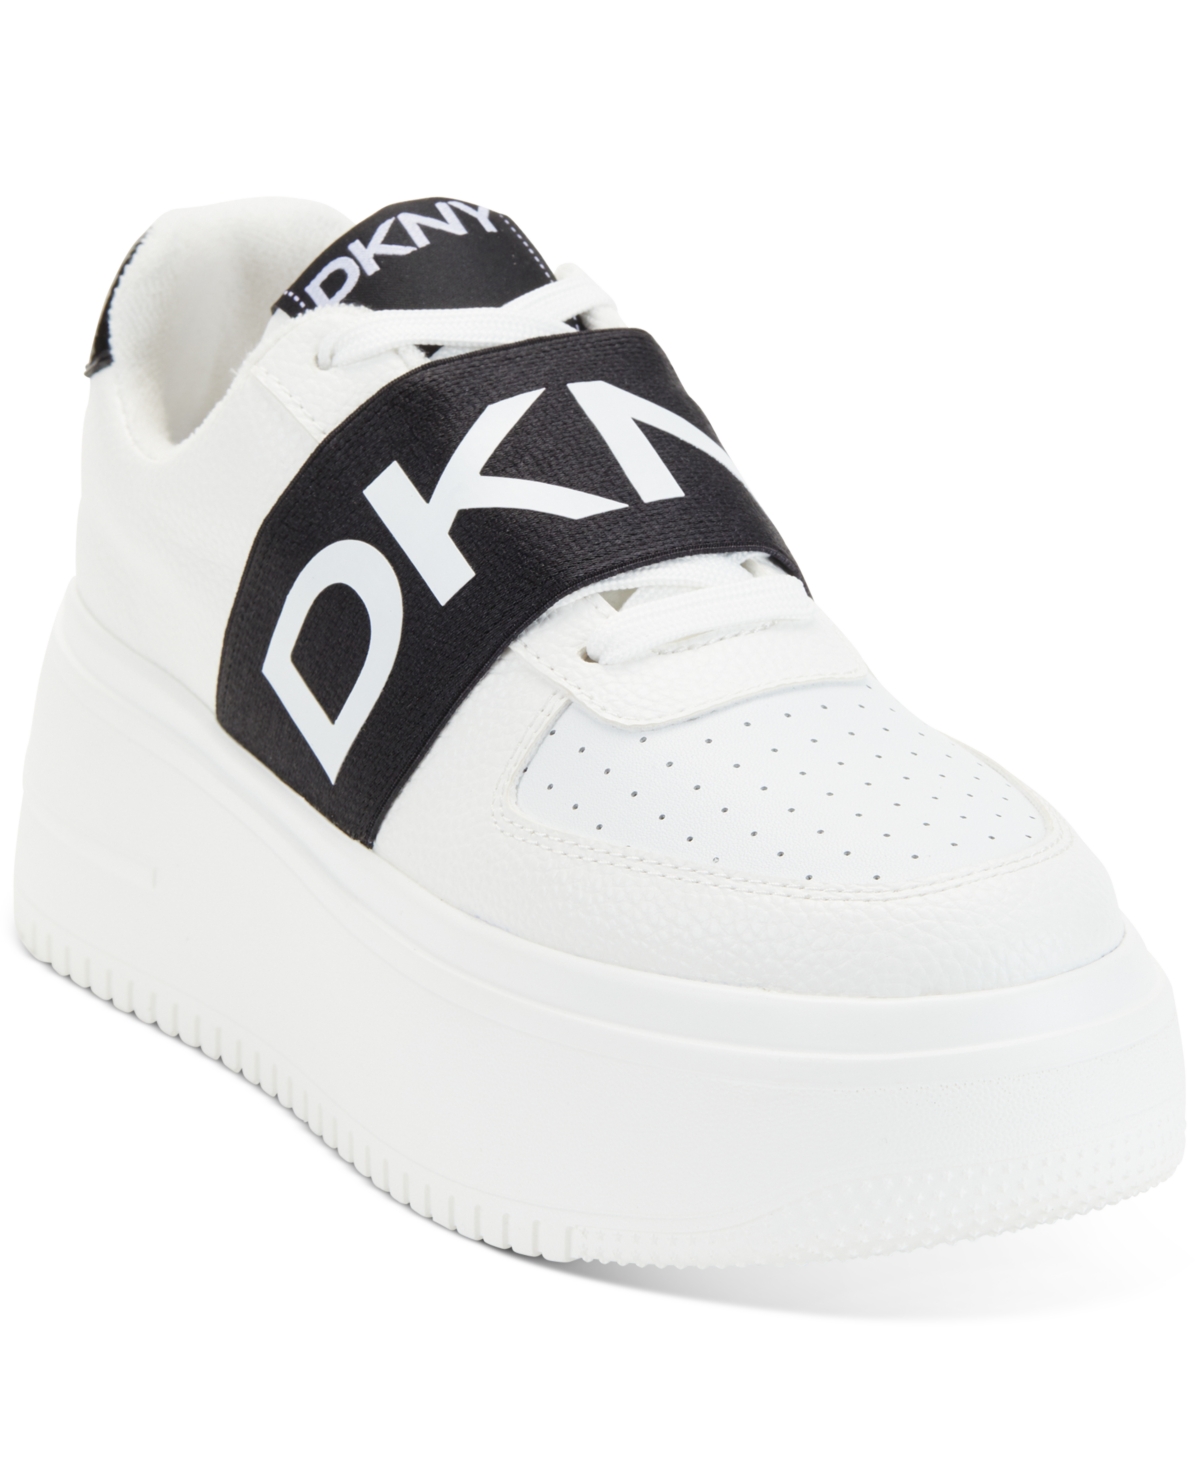 Dkny Women's Madigan Lace-Up Sneakers